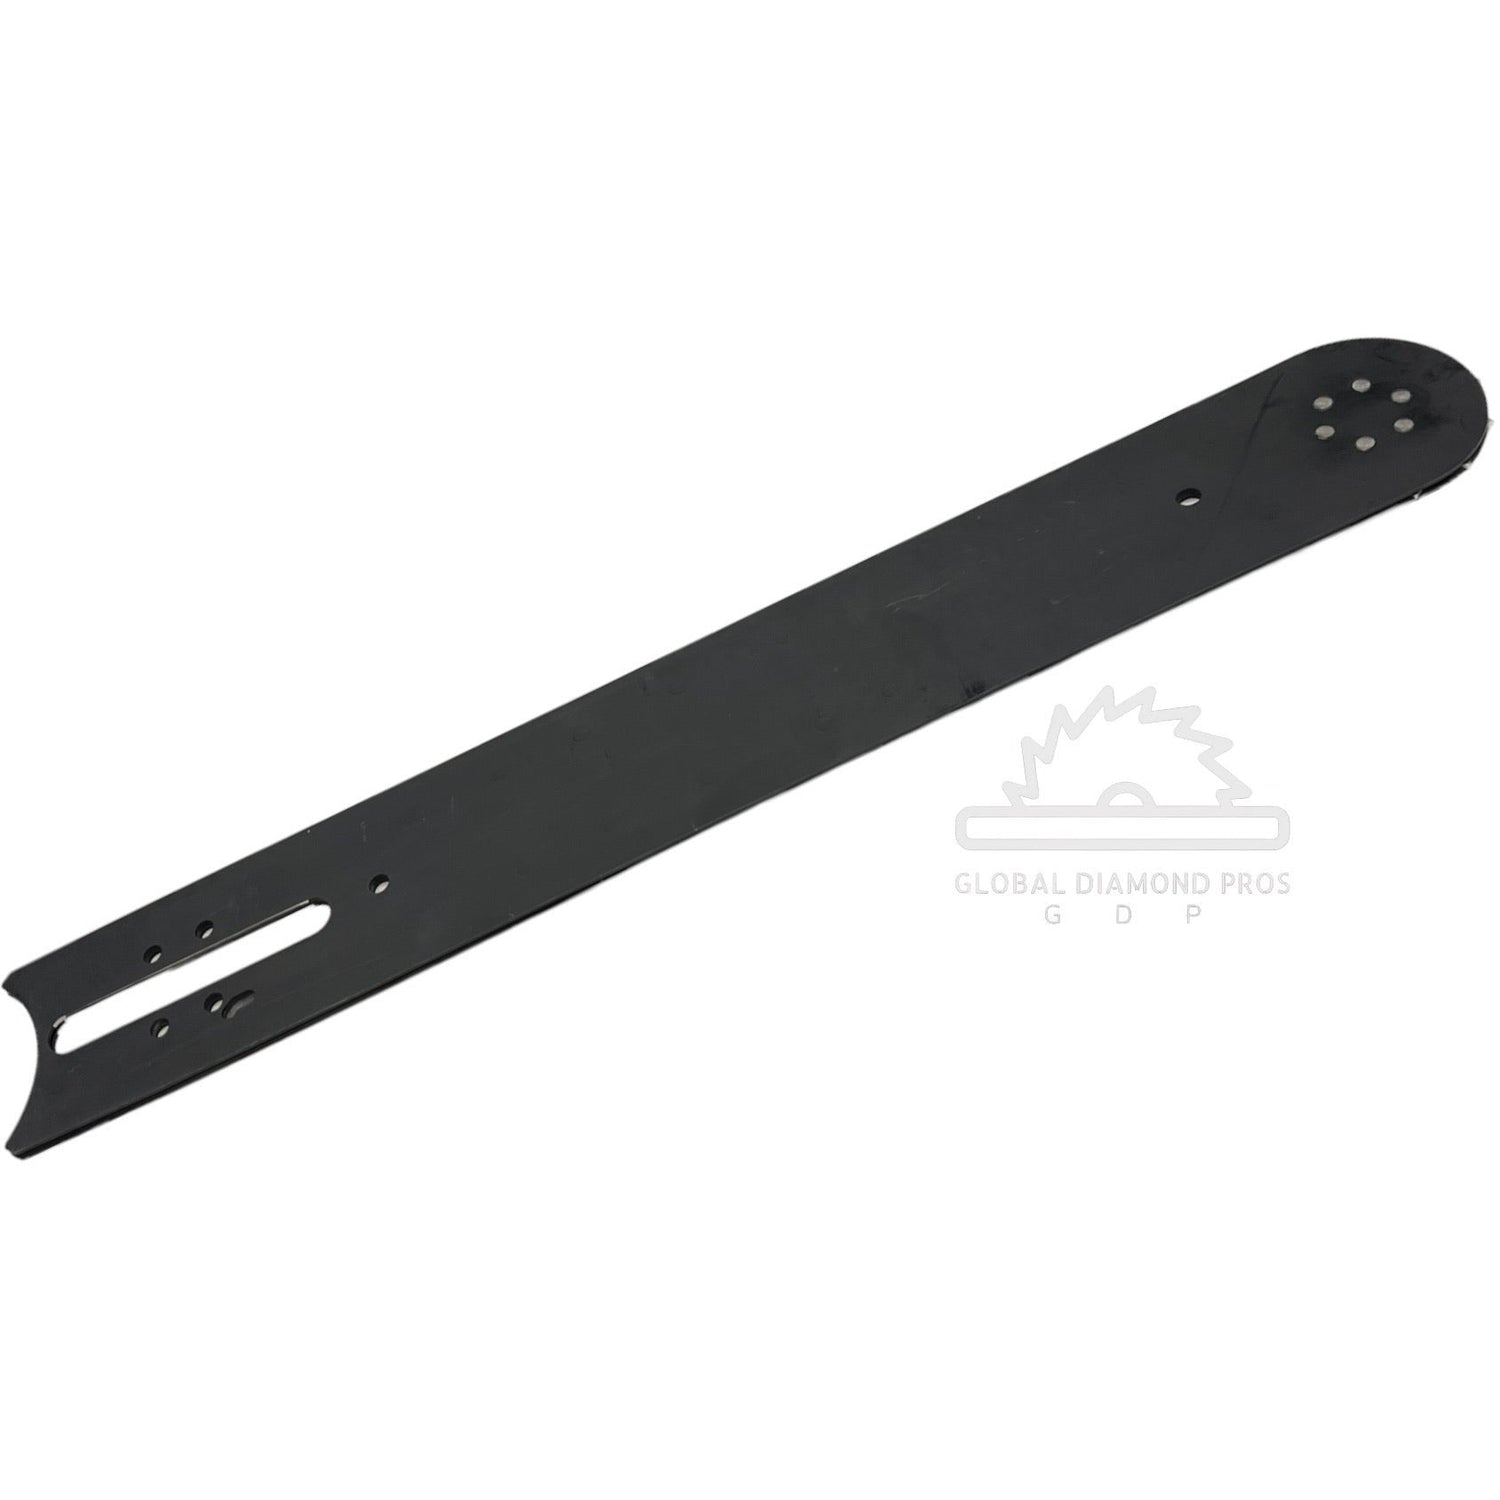  The ICS 25" Guide Bar (525320) is to be used on the 890F4 or 890F4-FL Hydraulic Saws. To be used with a 25" Force4 Diamond Chain.